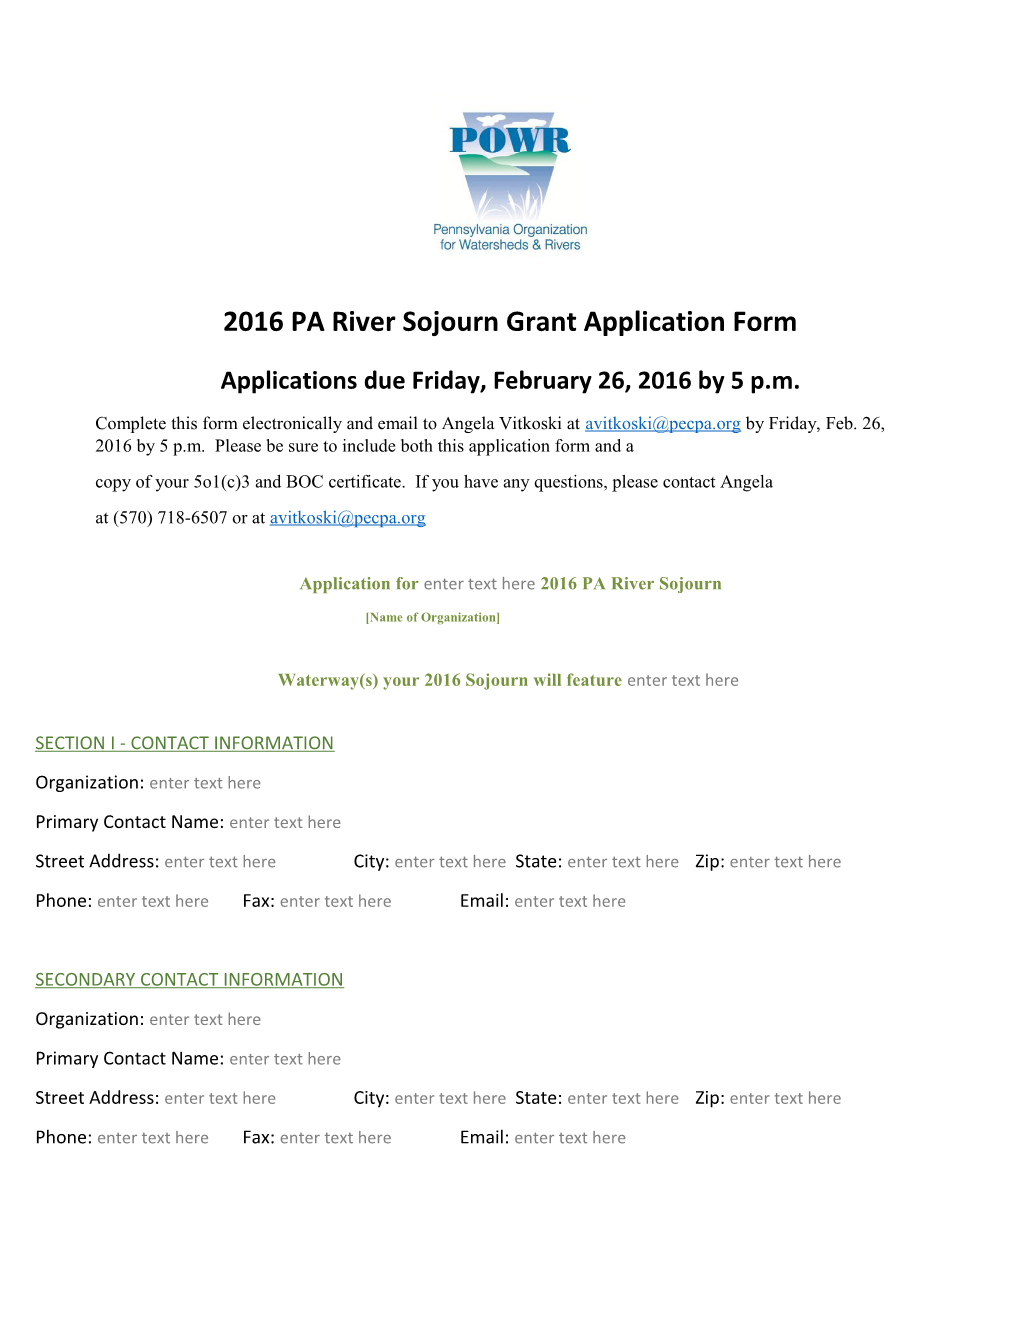 2016 PA River Sojourn Grant Application Form